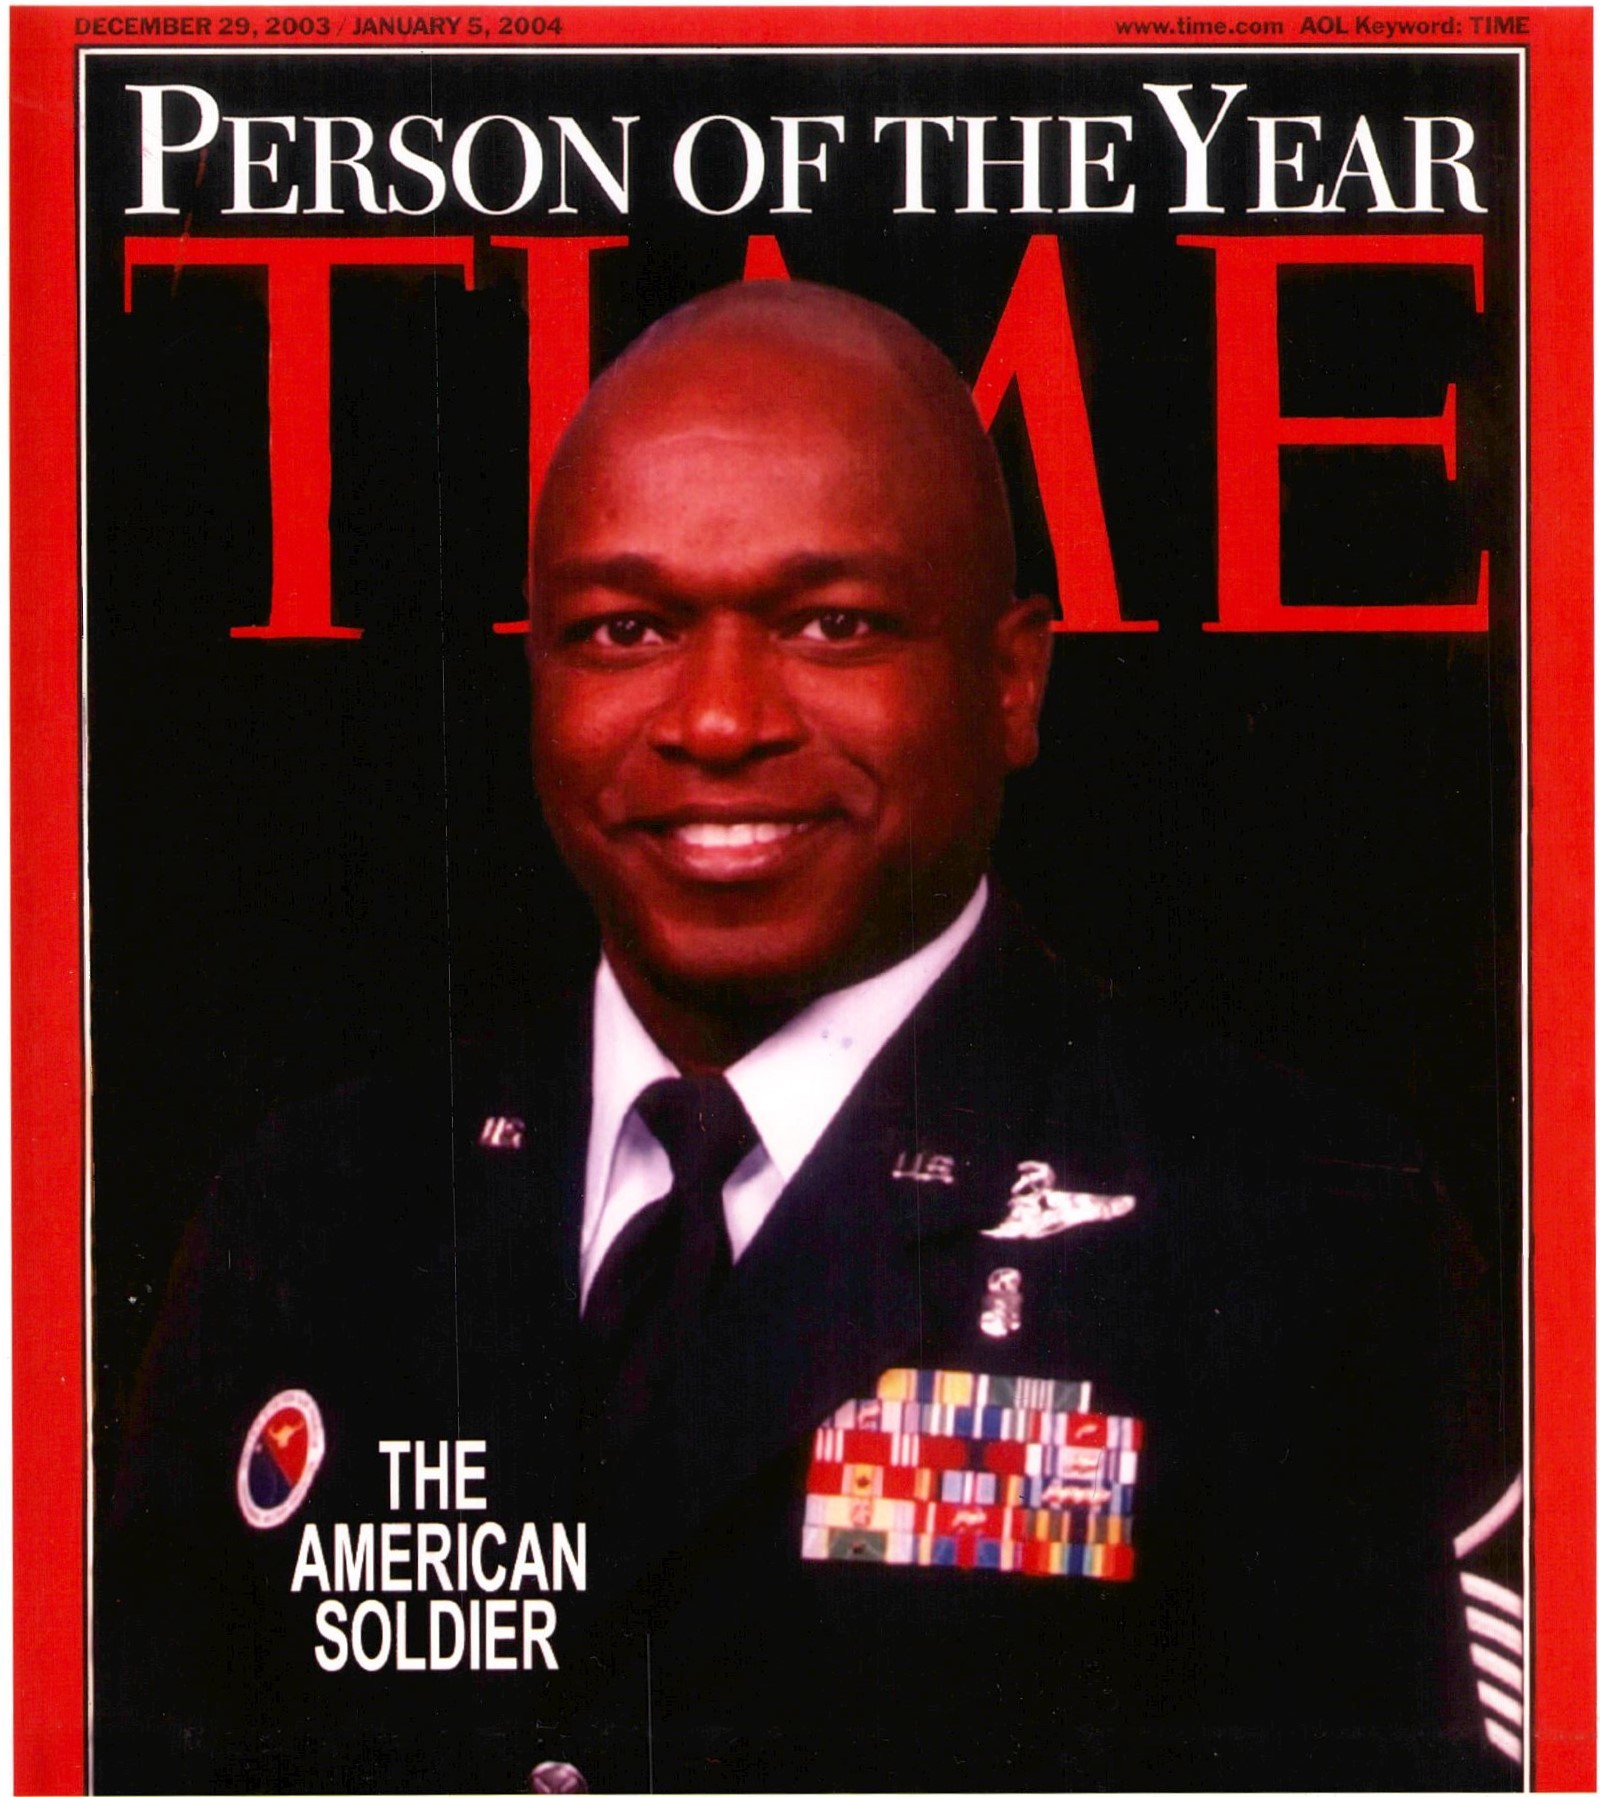 Wacinque on the cover of TIME Magazine named Person of the Year in 2003